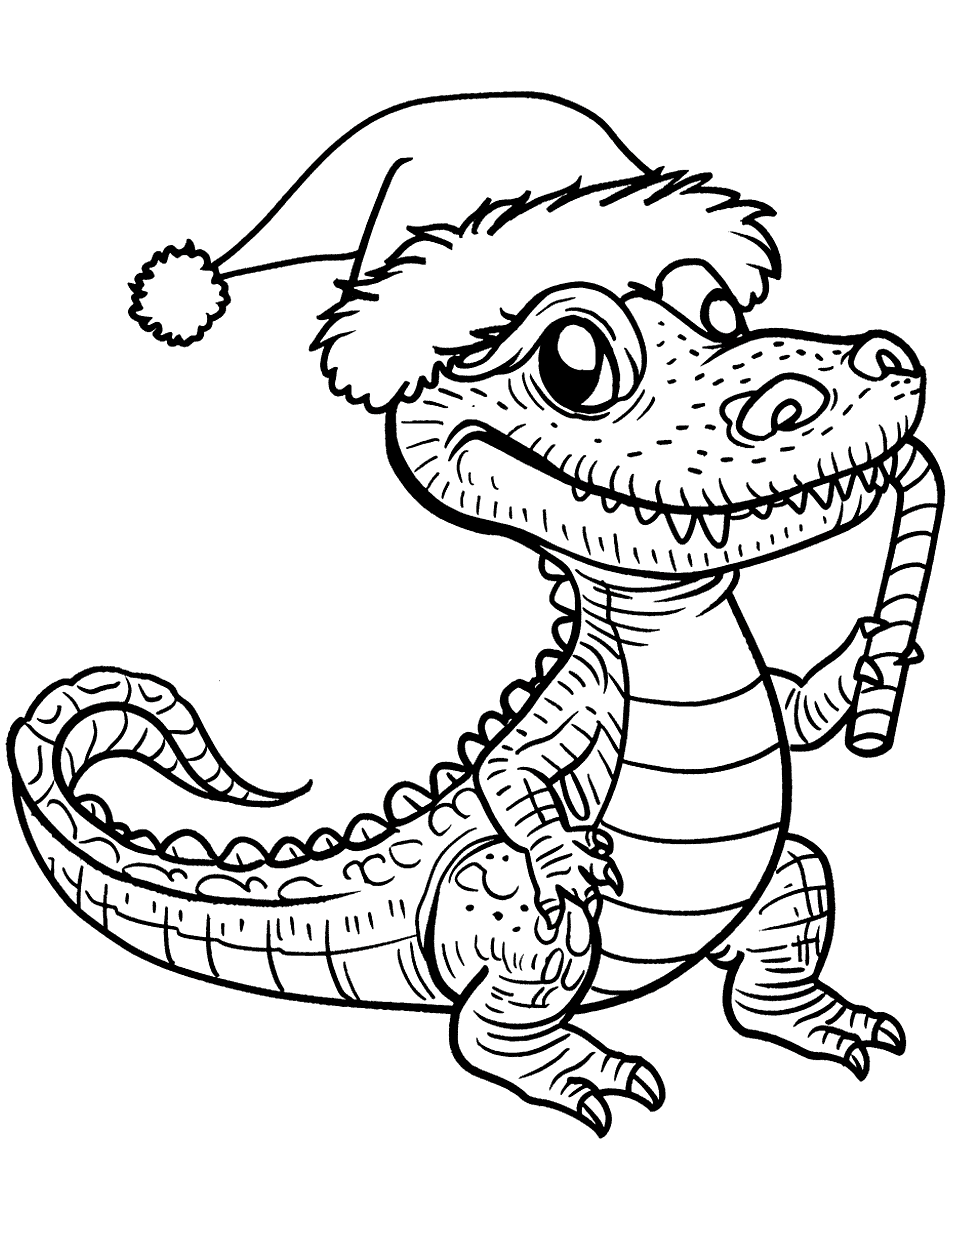 Christmas Alligator Coloring Page - An alligator wearing a Santa hat and holding a candy cane.